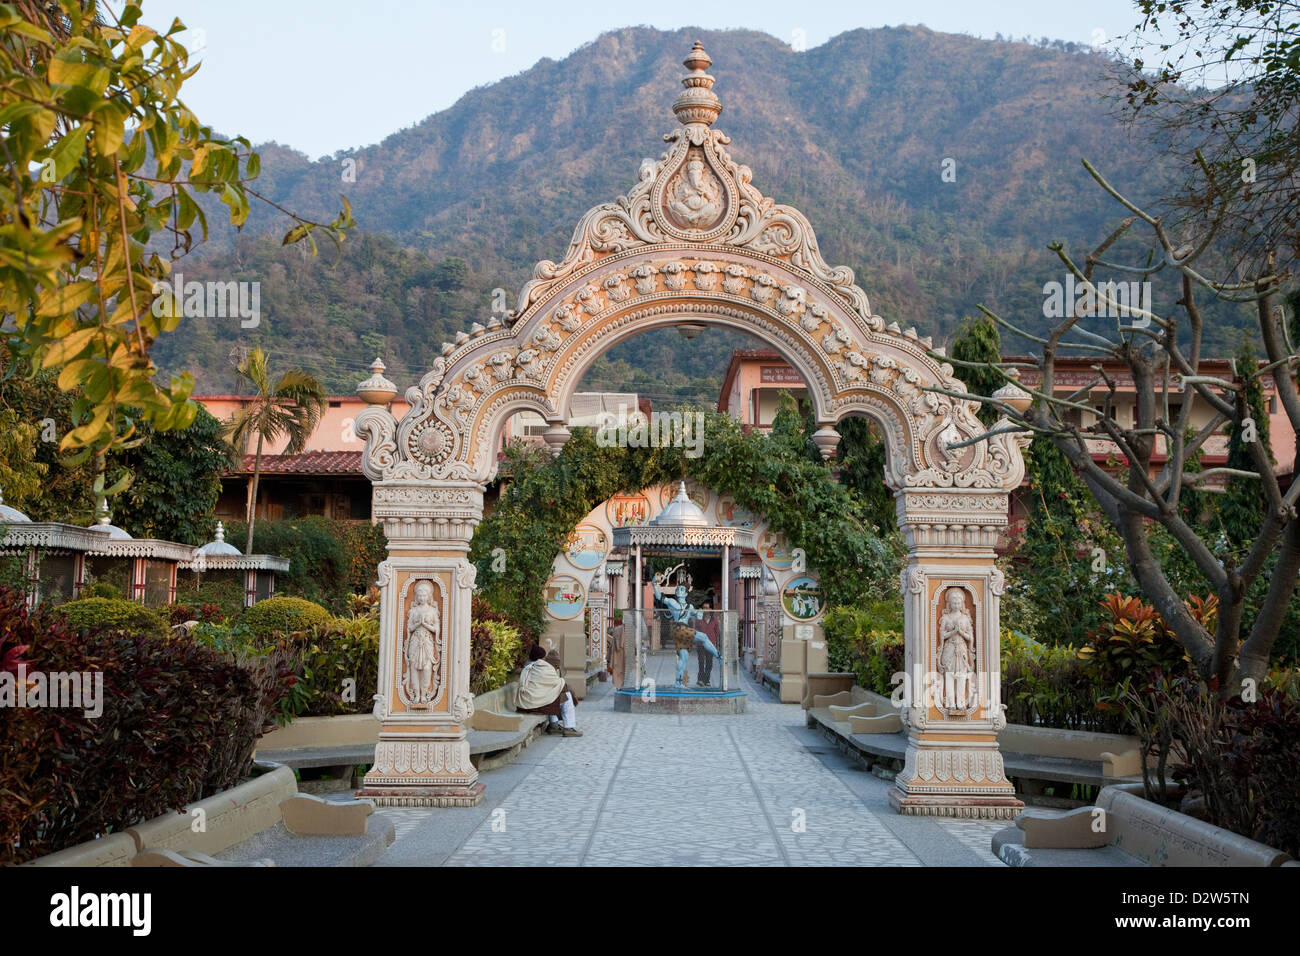 India, Rishikesh. Courtyard of the Parmarth Niketan Ashram. A blue-tinted statue of Shiva is under the second arch. Stock Photo